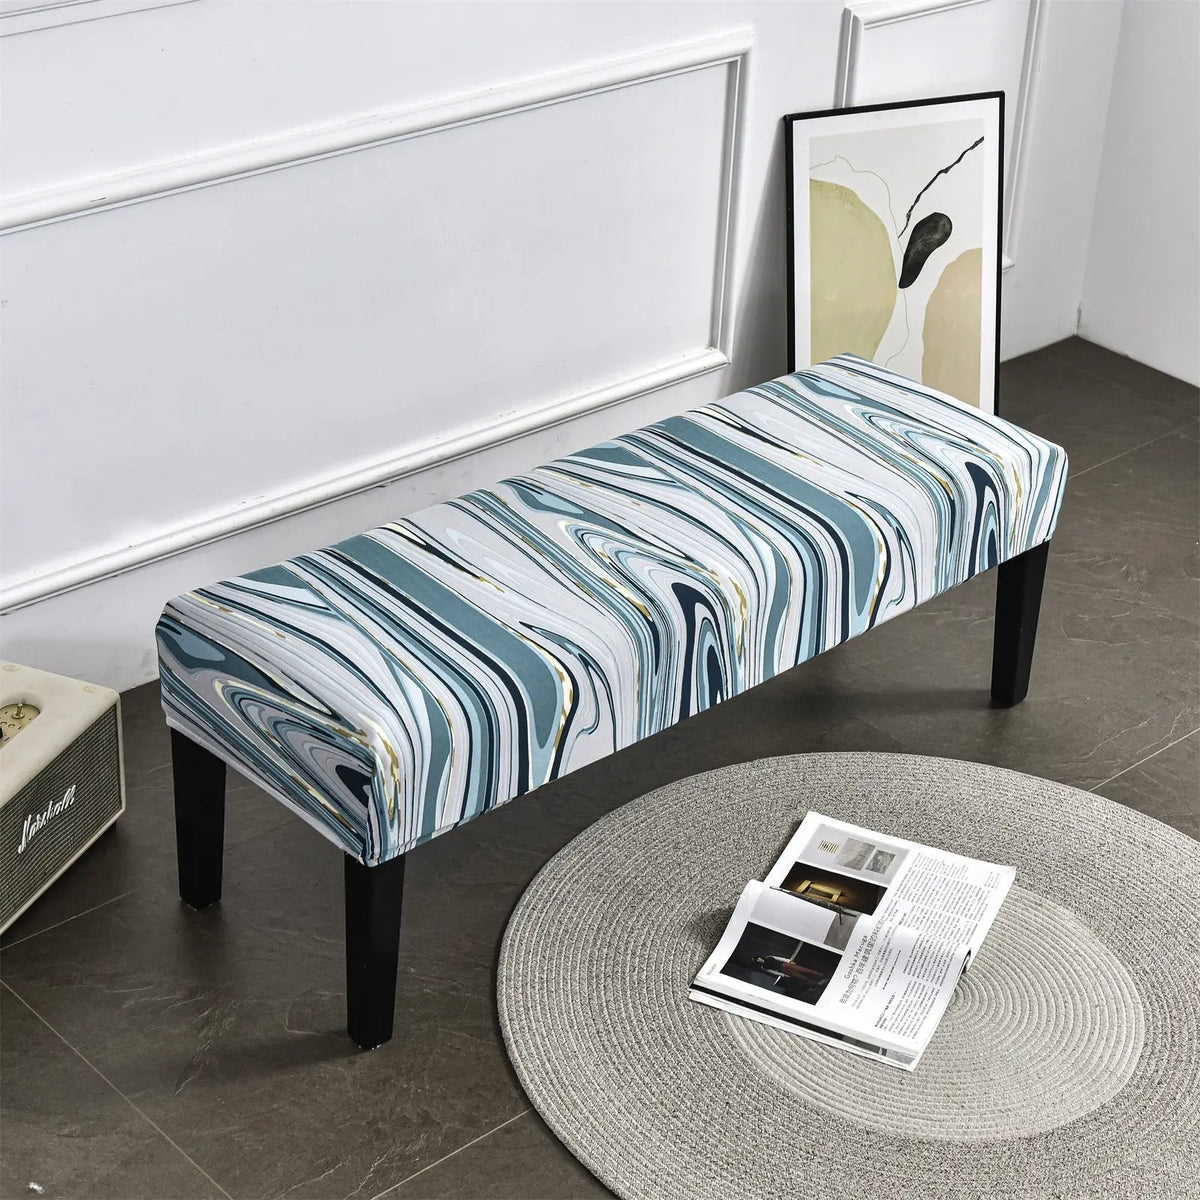 Elastic Textured Bench Cover Slipcover Plaid Striped Decorative Furniture Slipcover Crfatop Crfatop %sku%